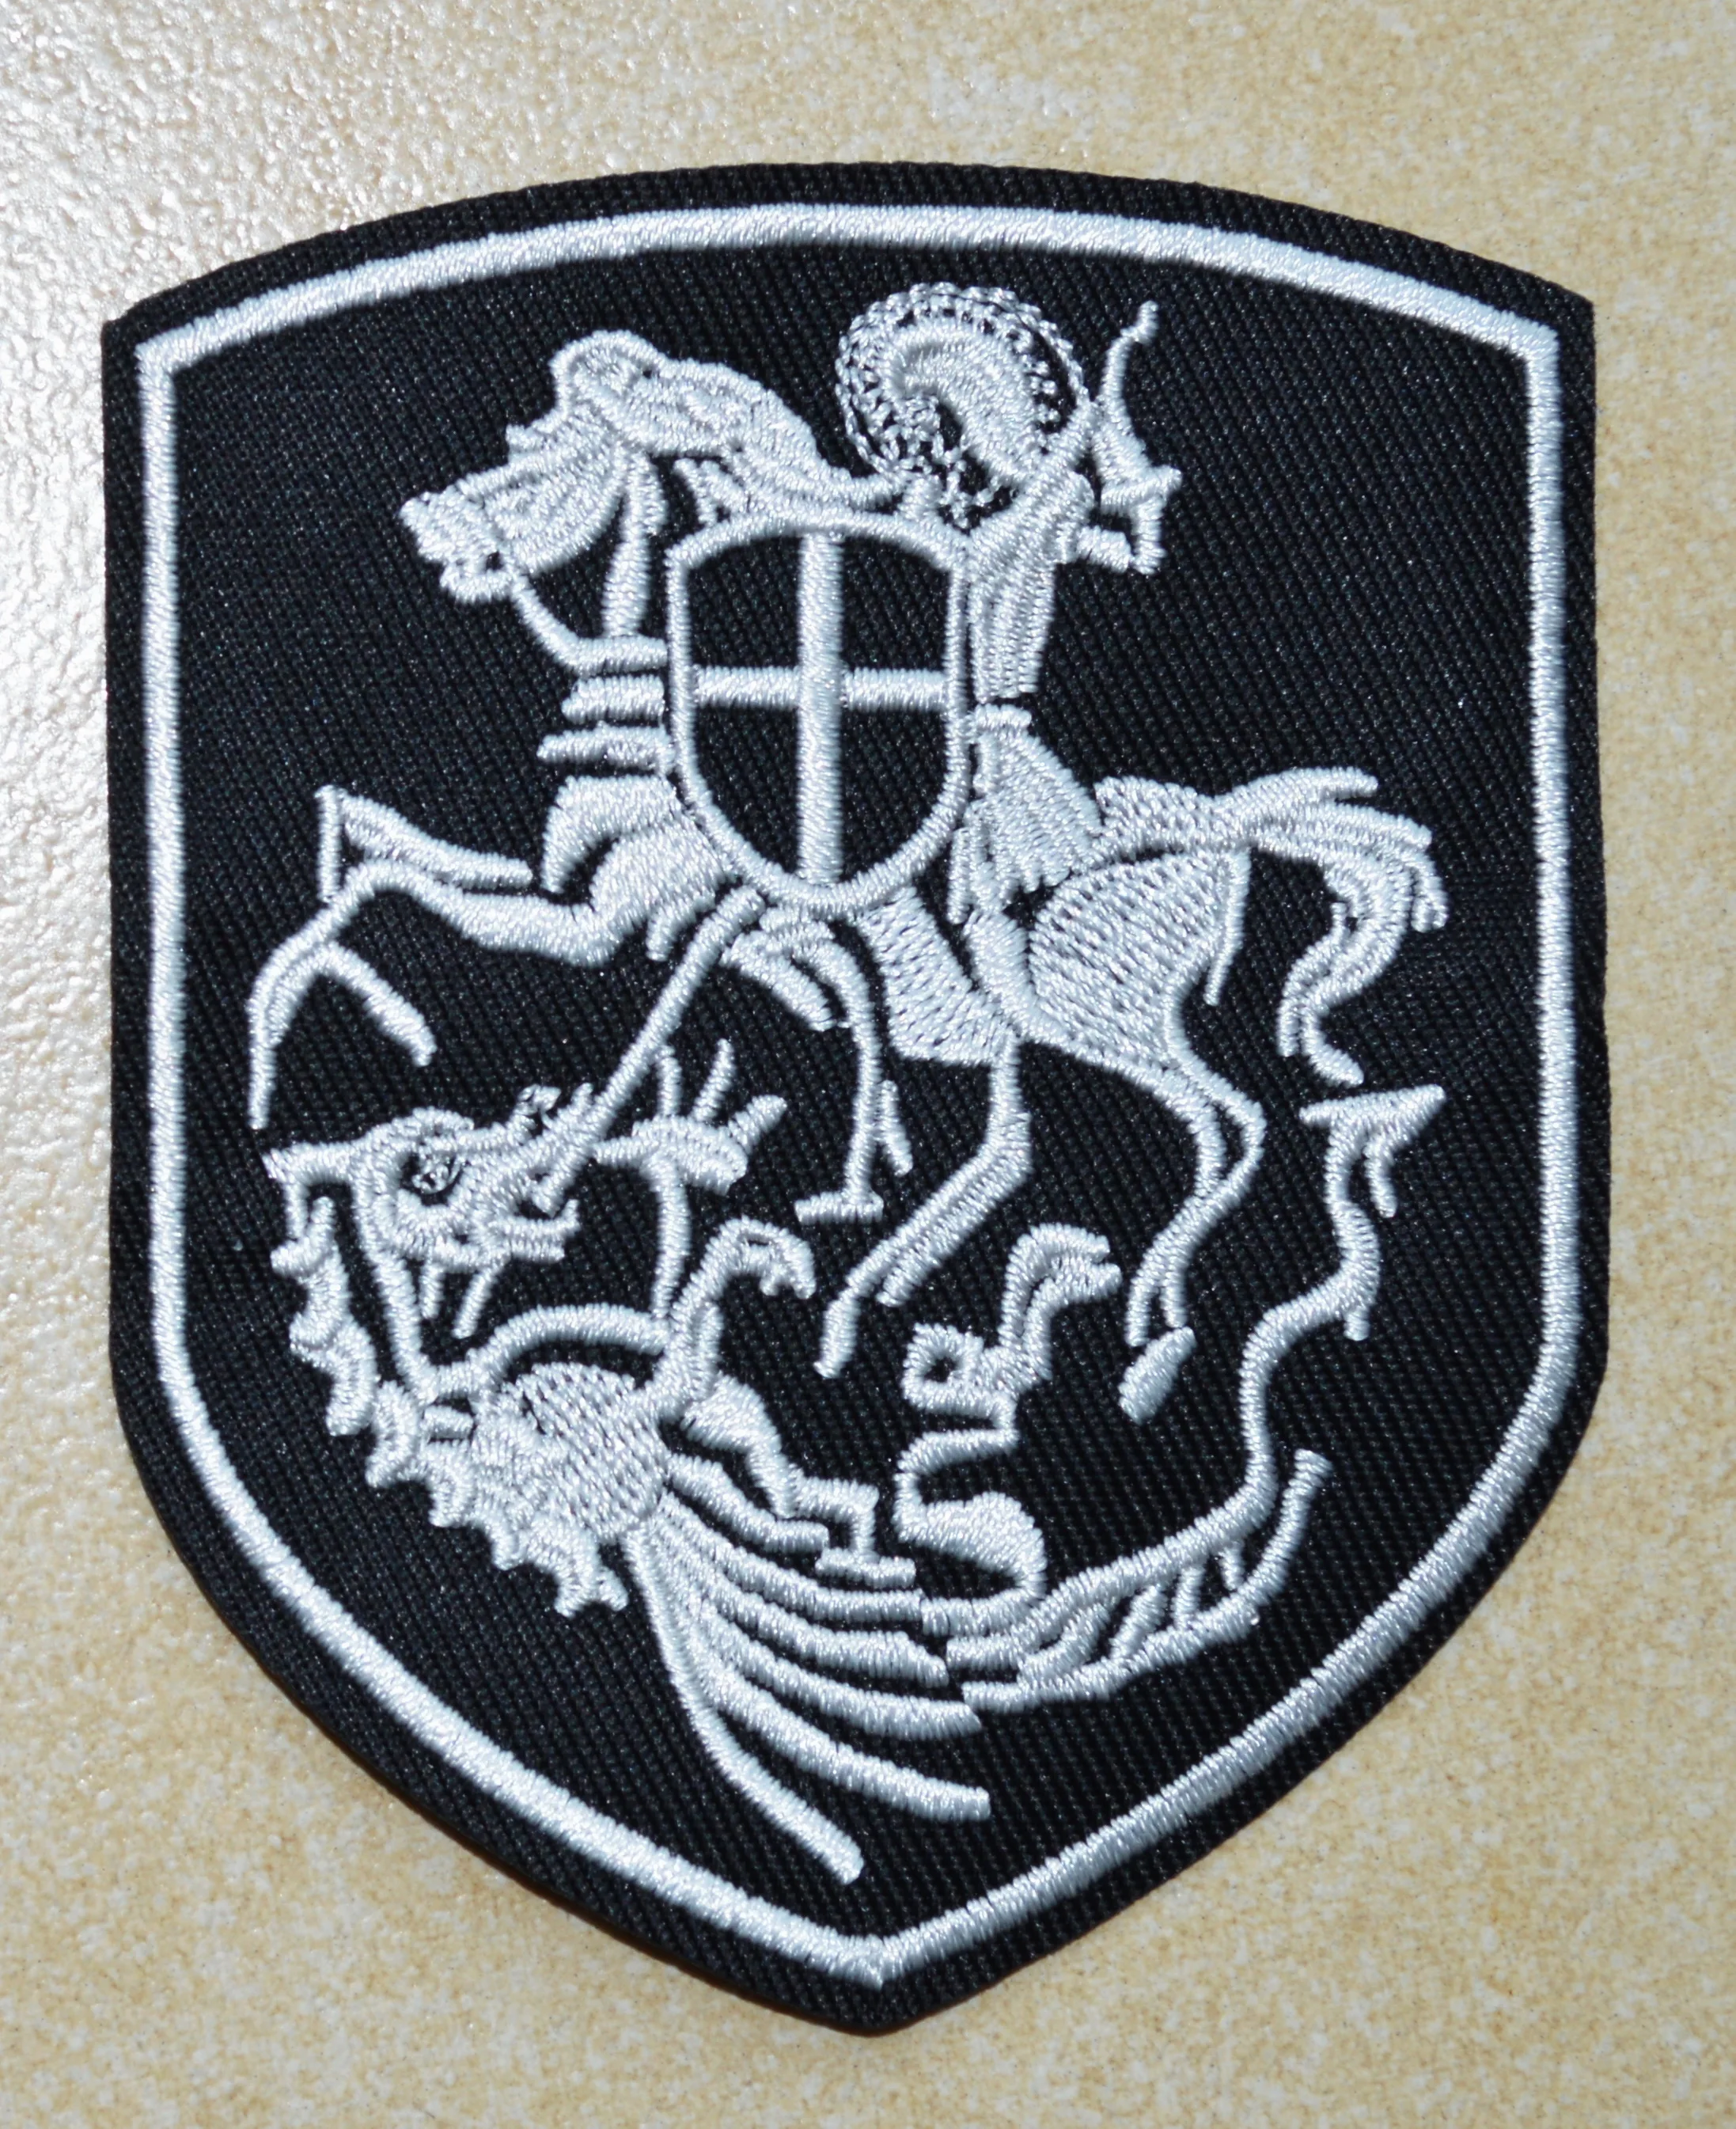 

120x KNIGHTS TEMPLAR SEAL ~ Grey Dragon kill puck Iron On Patches, sew on patch,Appliques, Made of Cloth,100% Quality